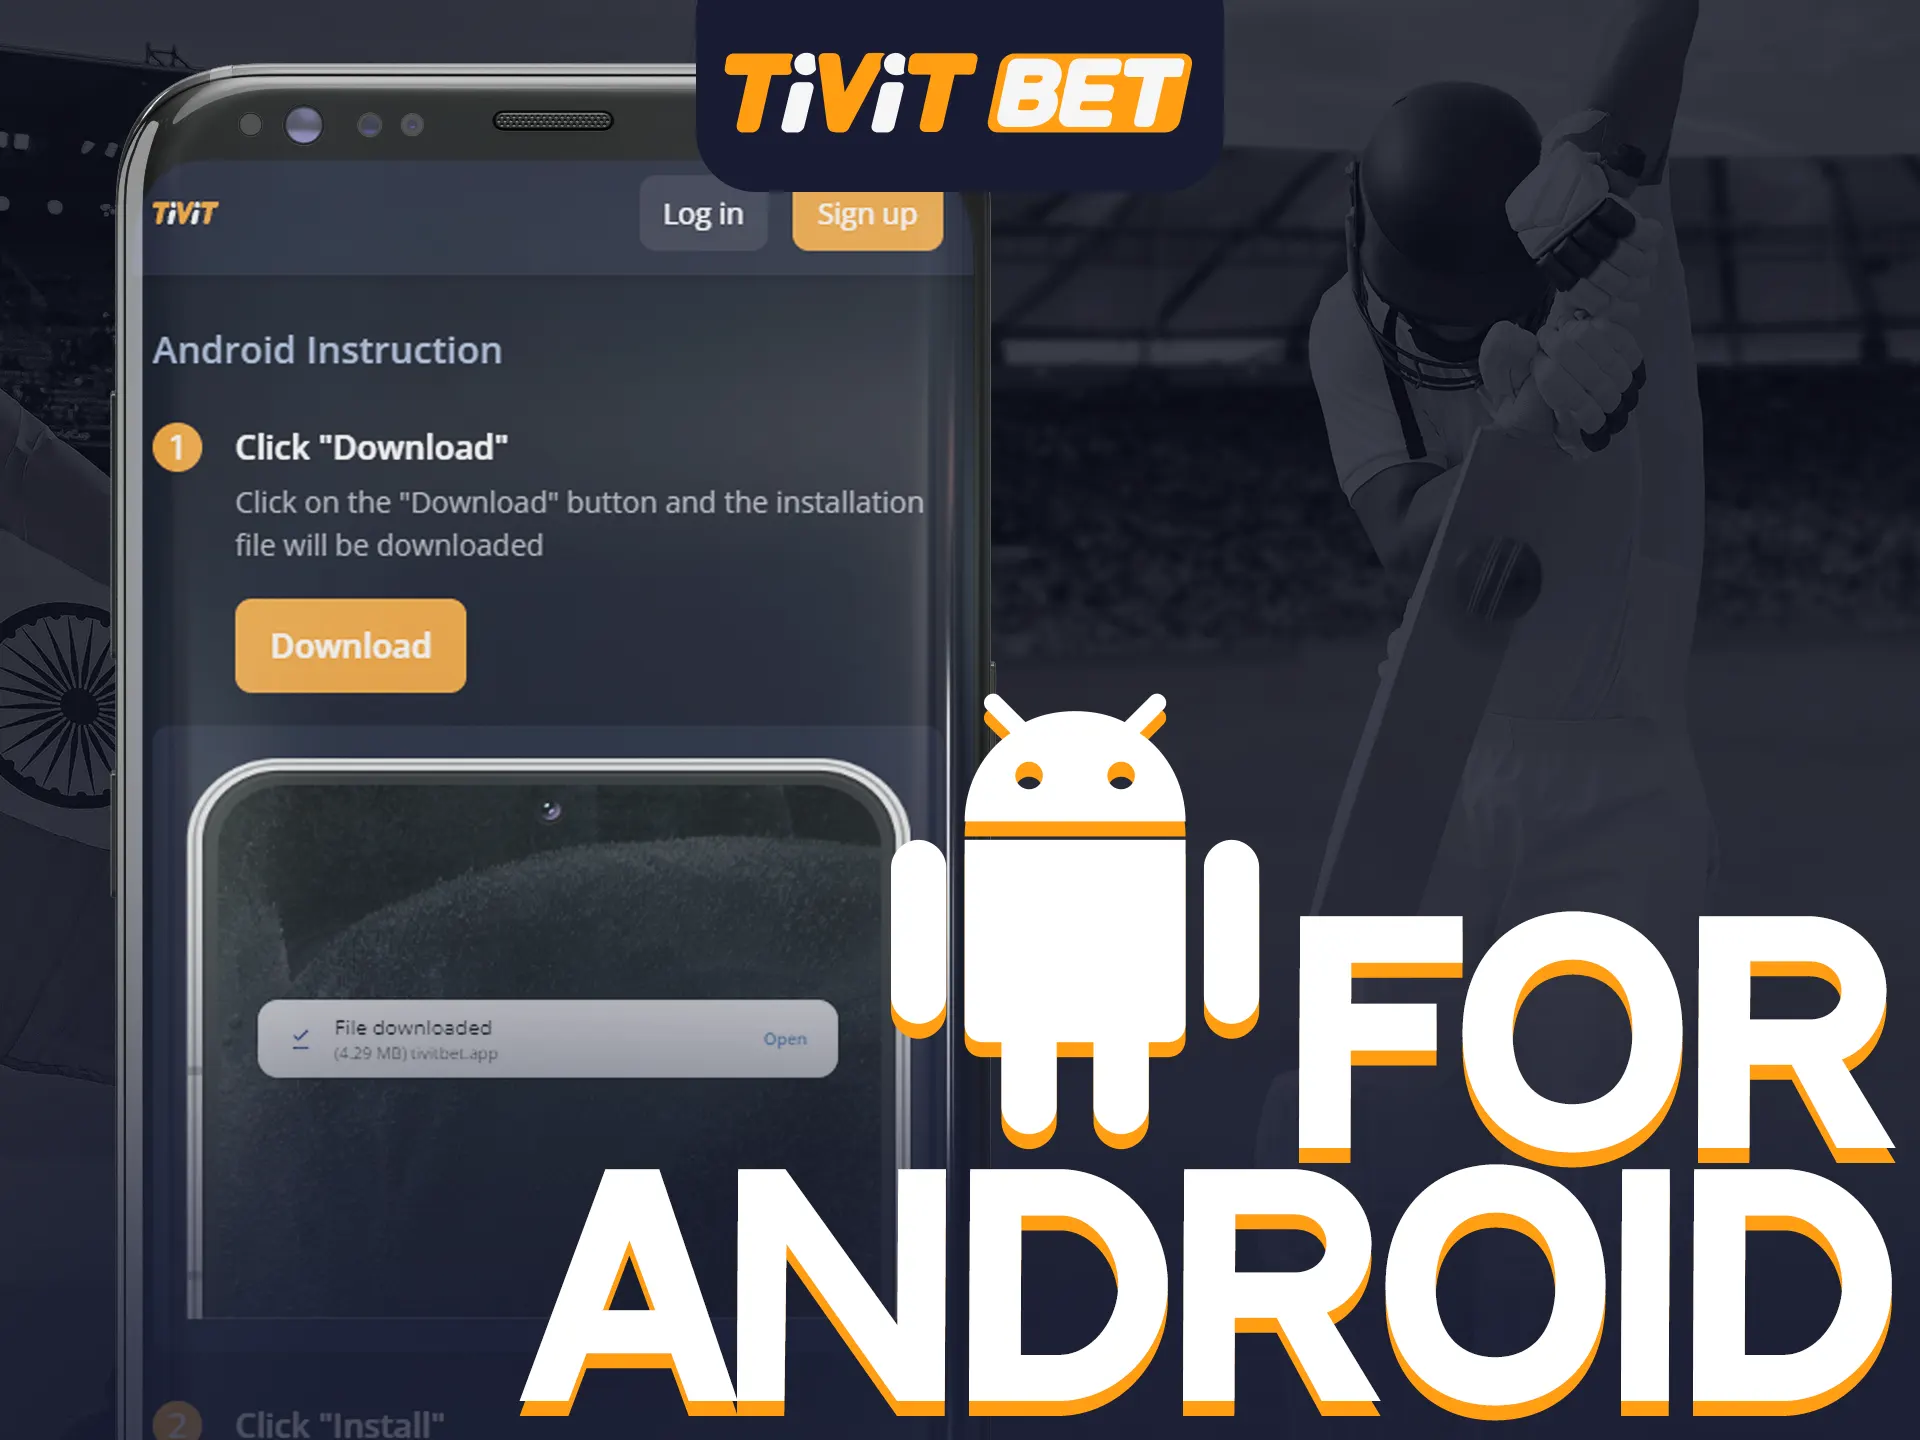 You can download the Tivit Bet app for Android through the browser on your phone.